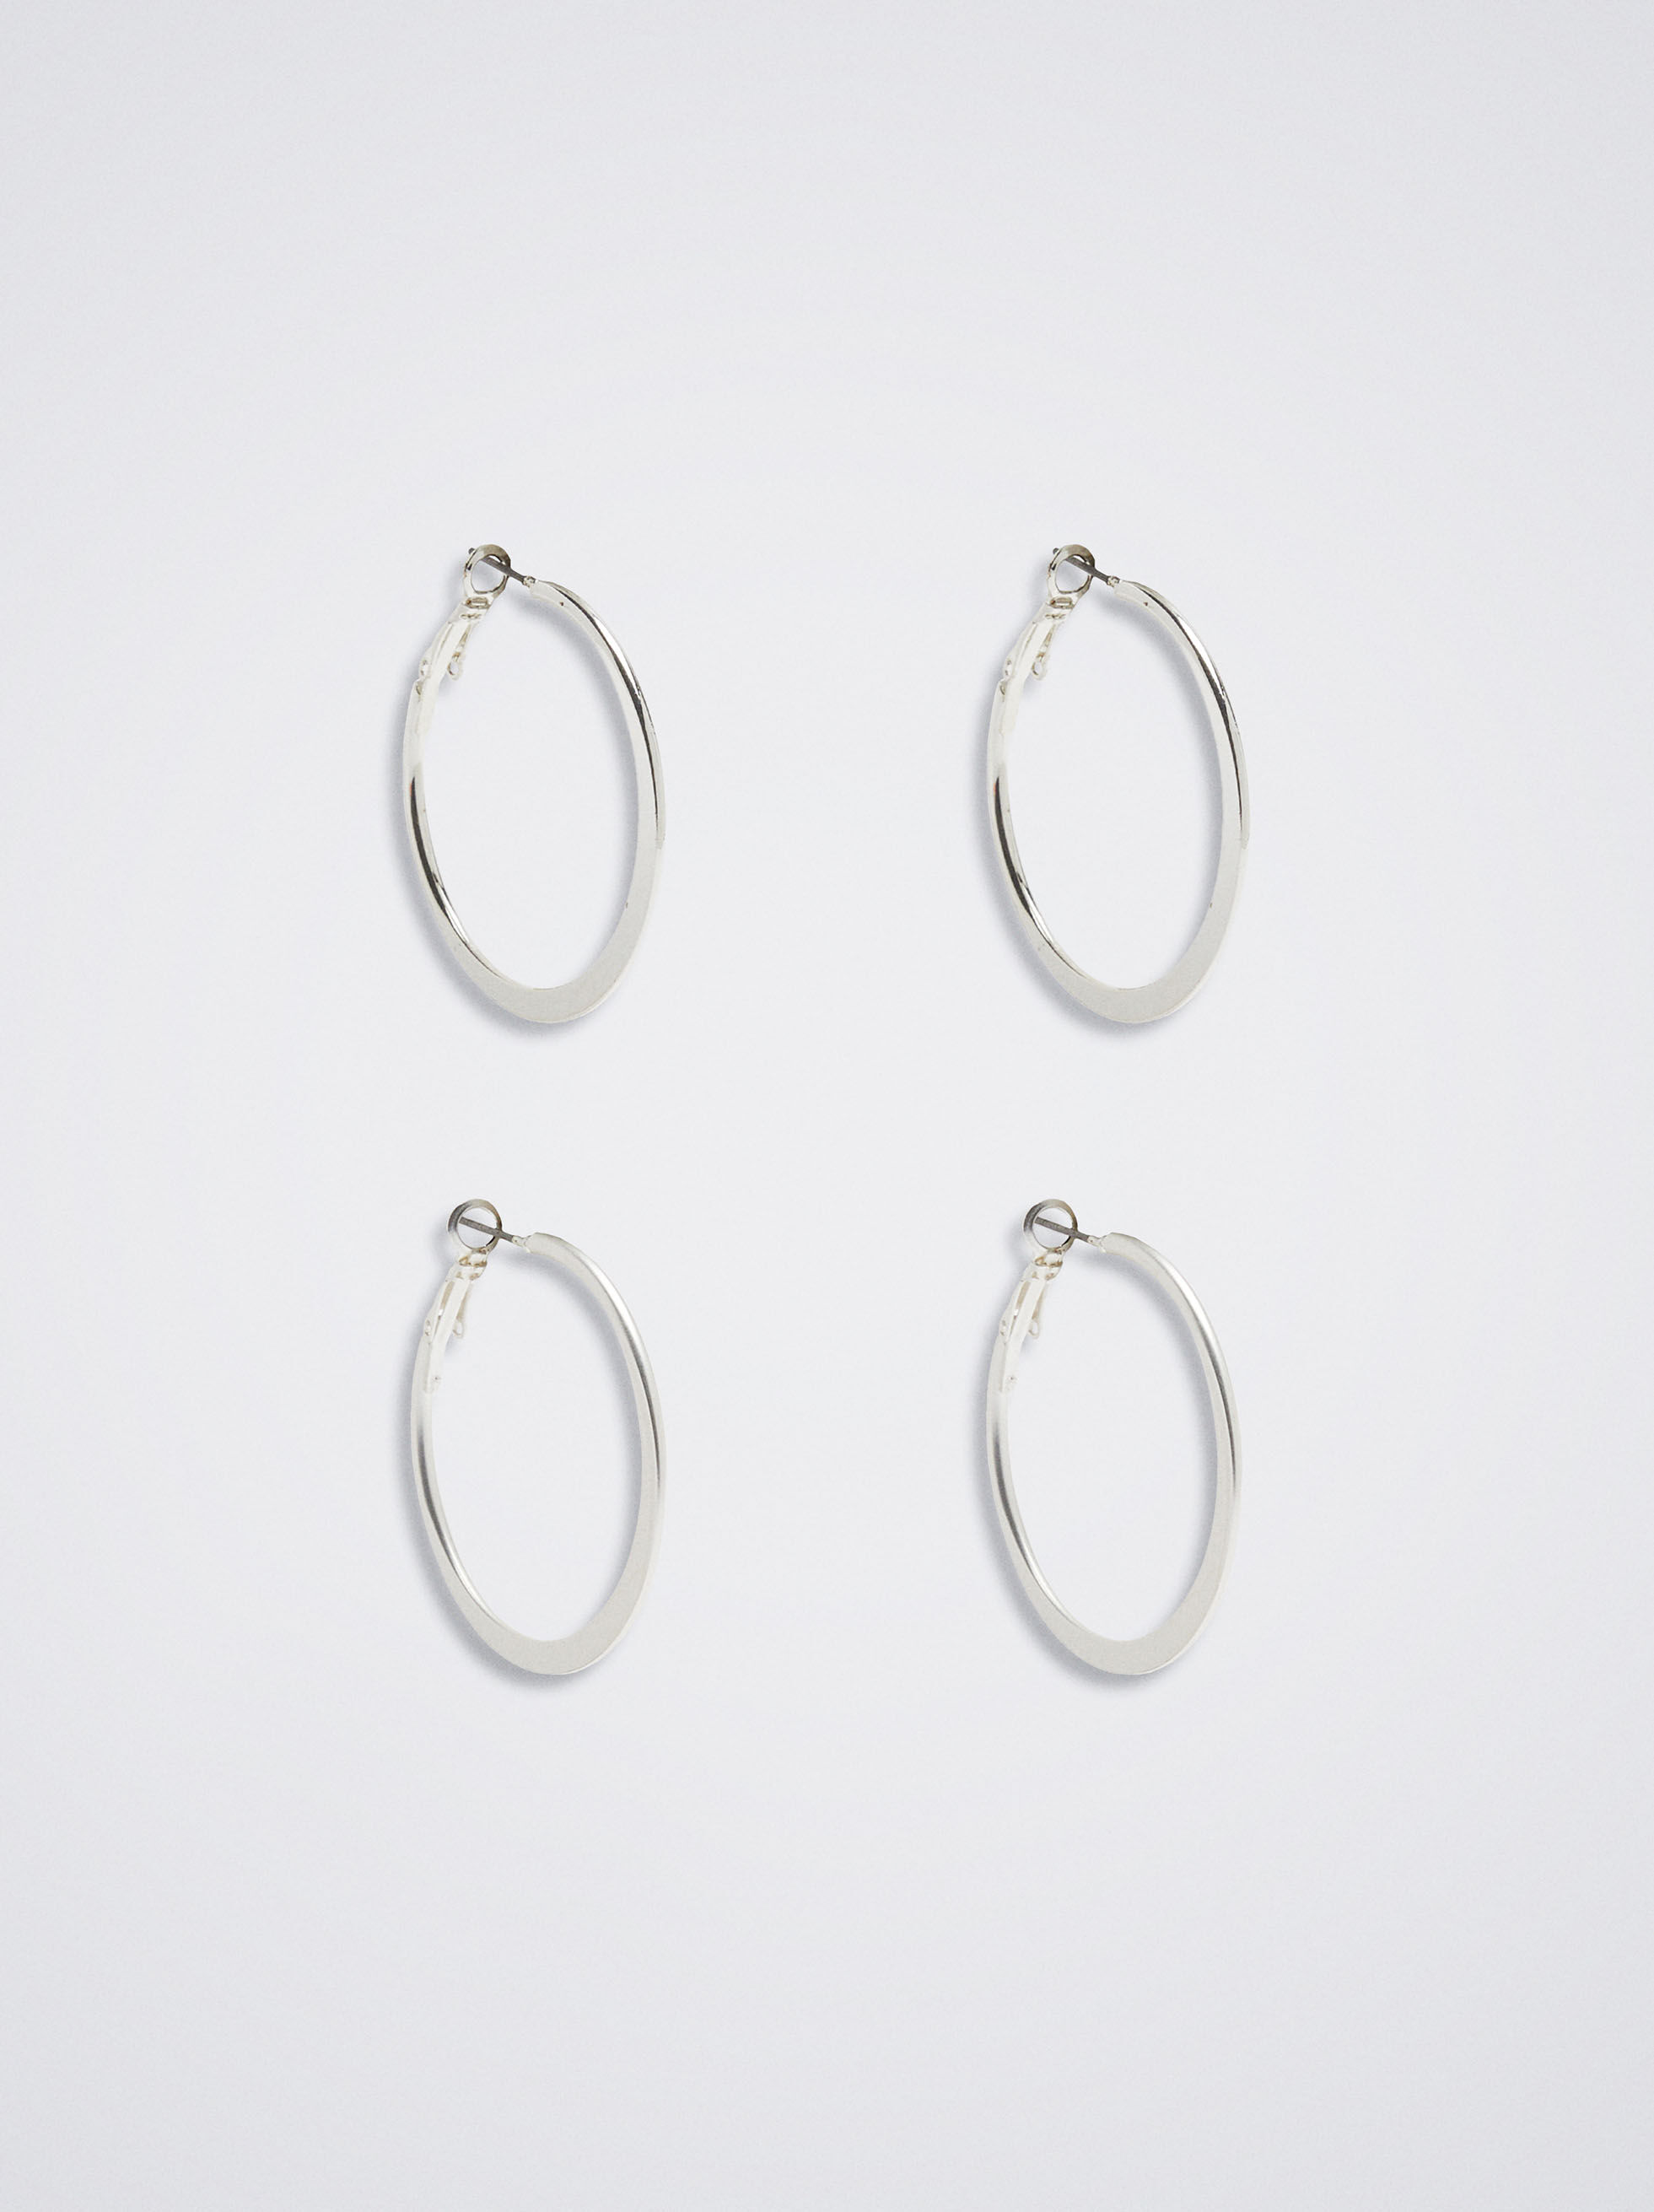 100 affordable stainless steel For Sale  Earrings  Carousell Singapore